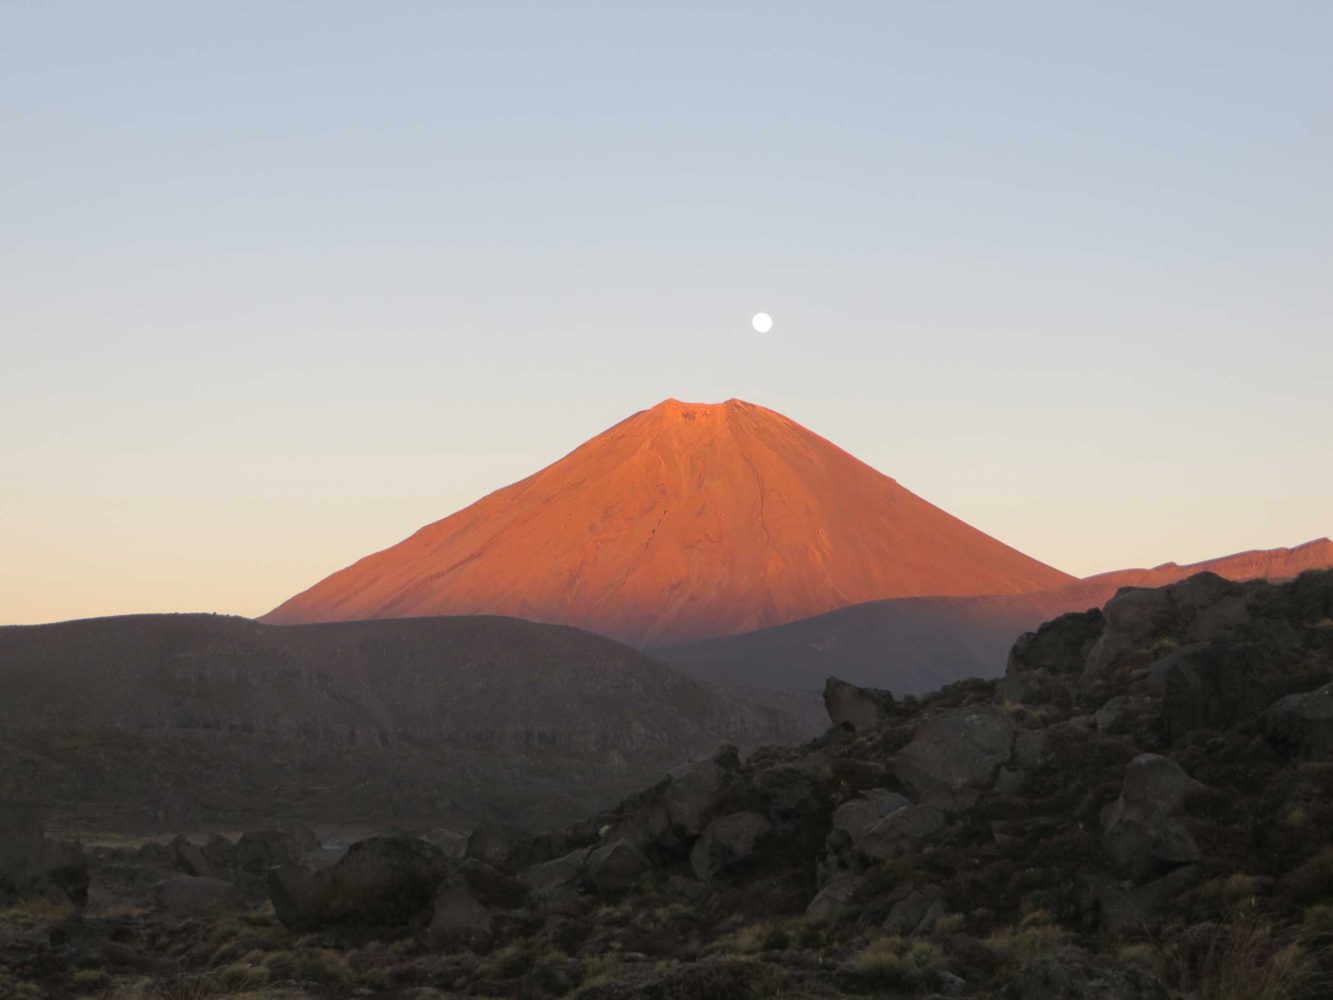 Moon setting behind a red Mt Ngauruhoe at sunrise, New Zealand